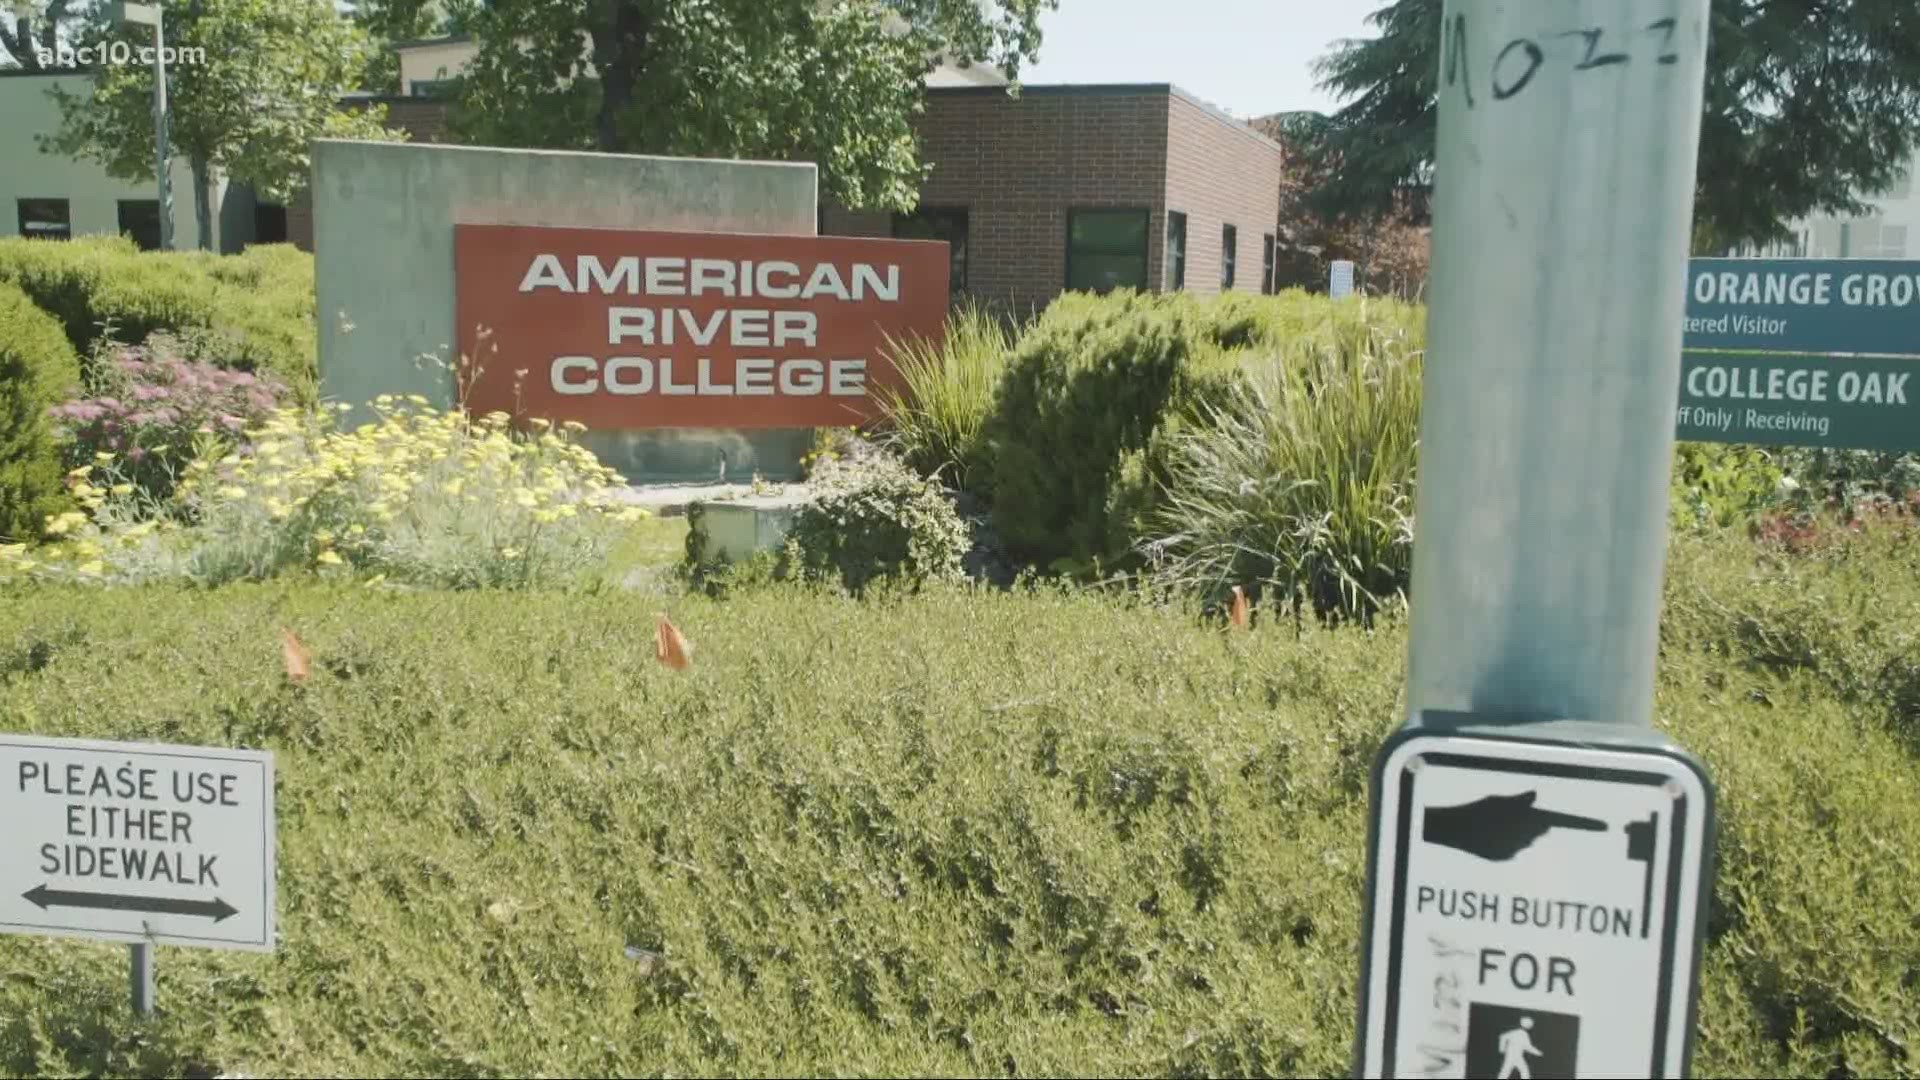 Nursing students at American River College are speaking out after learning they'll have to redo their semester, just weeks before the finish line.